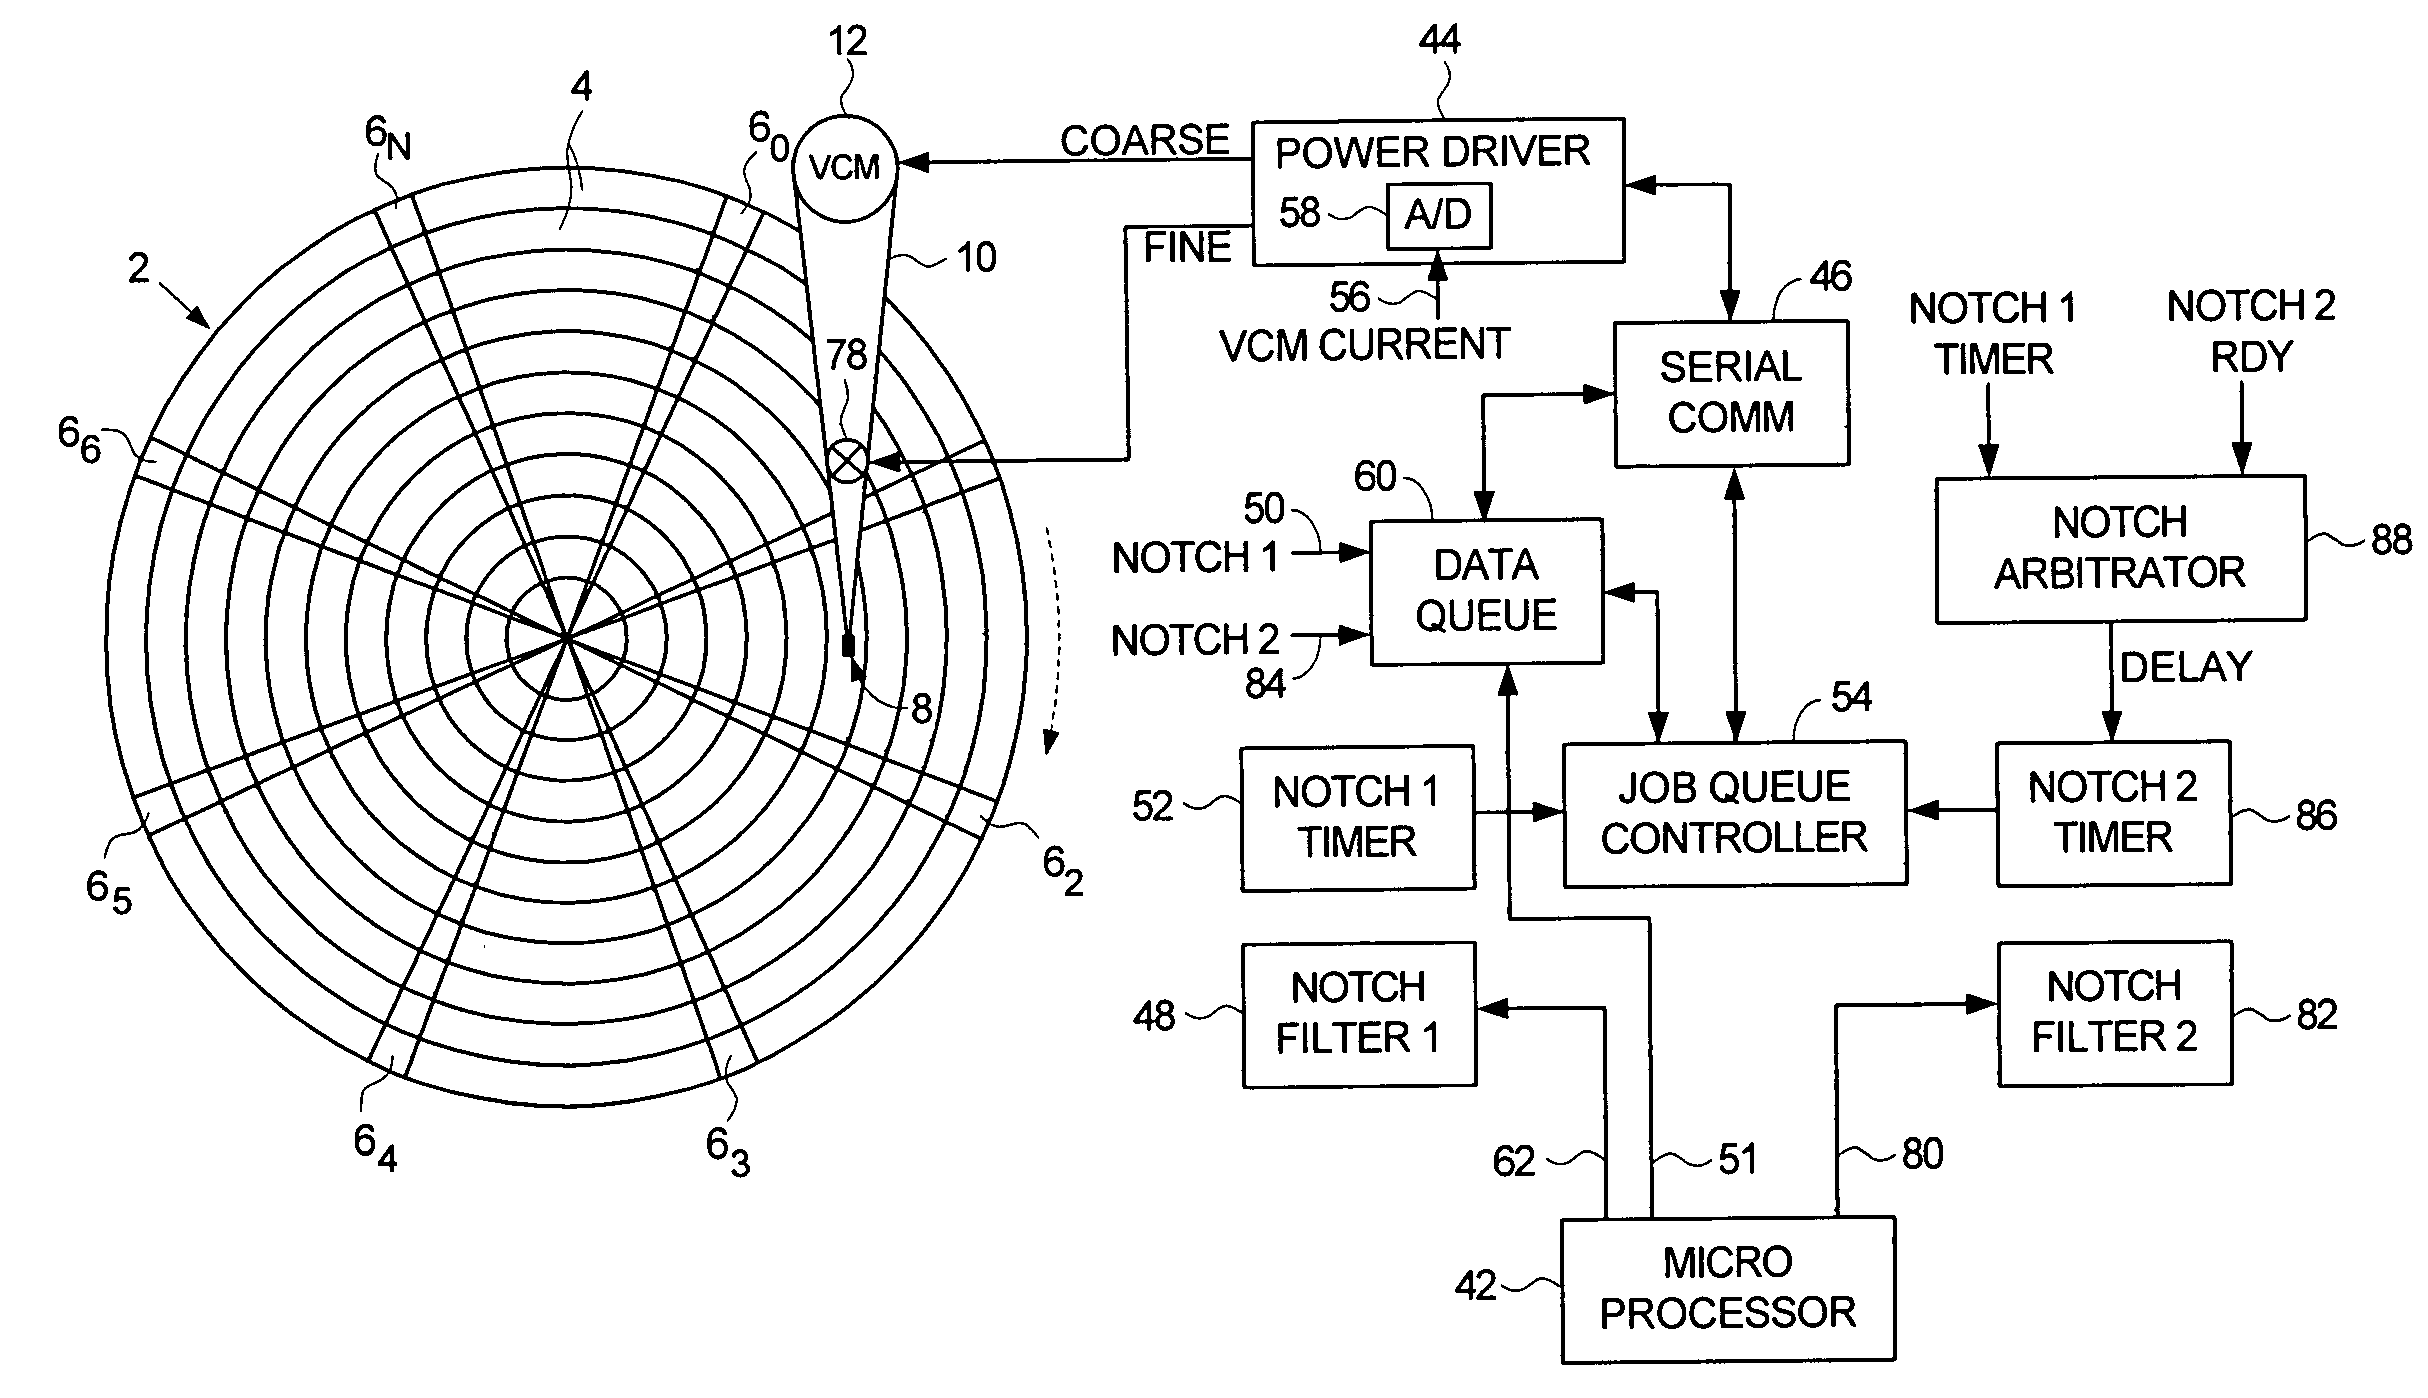 Disk drive using a timer to arbitrate periodic serial communication with a power driver